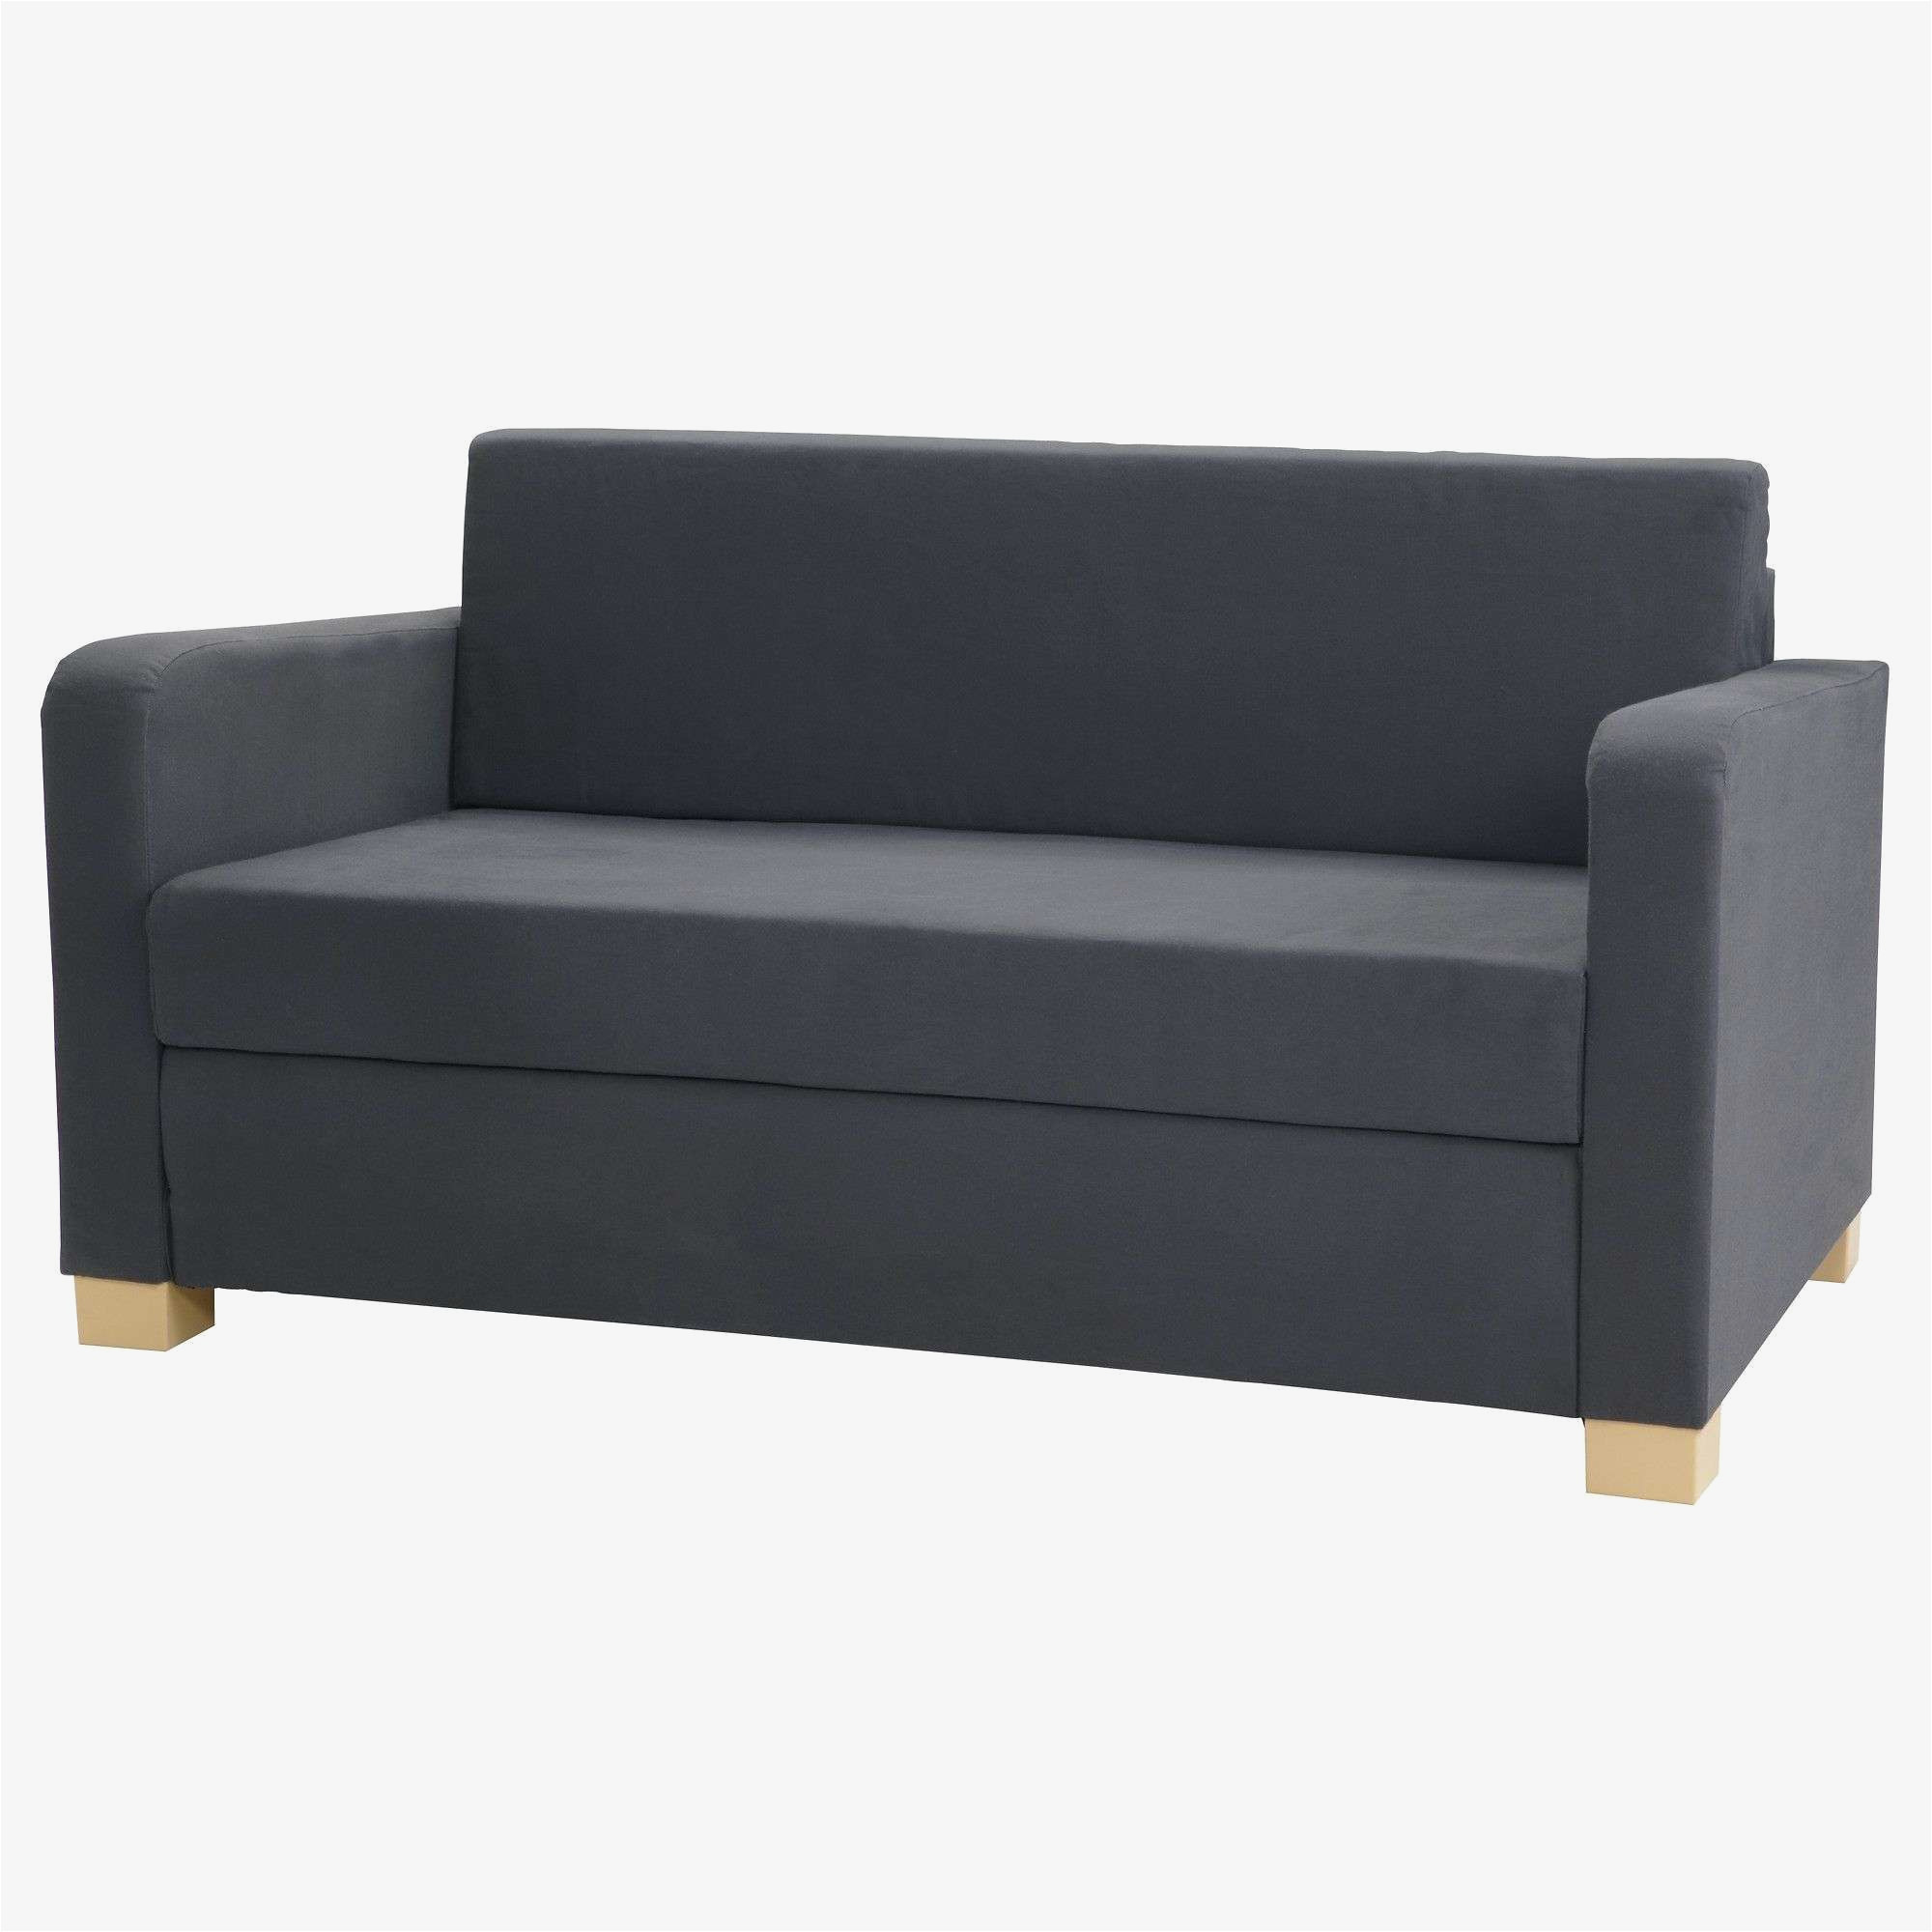 simple ikea friheten sofa bed review home design planning beautiful to home improvement